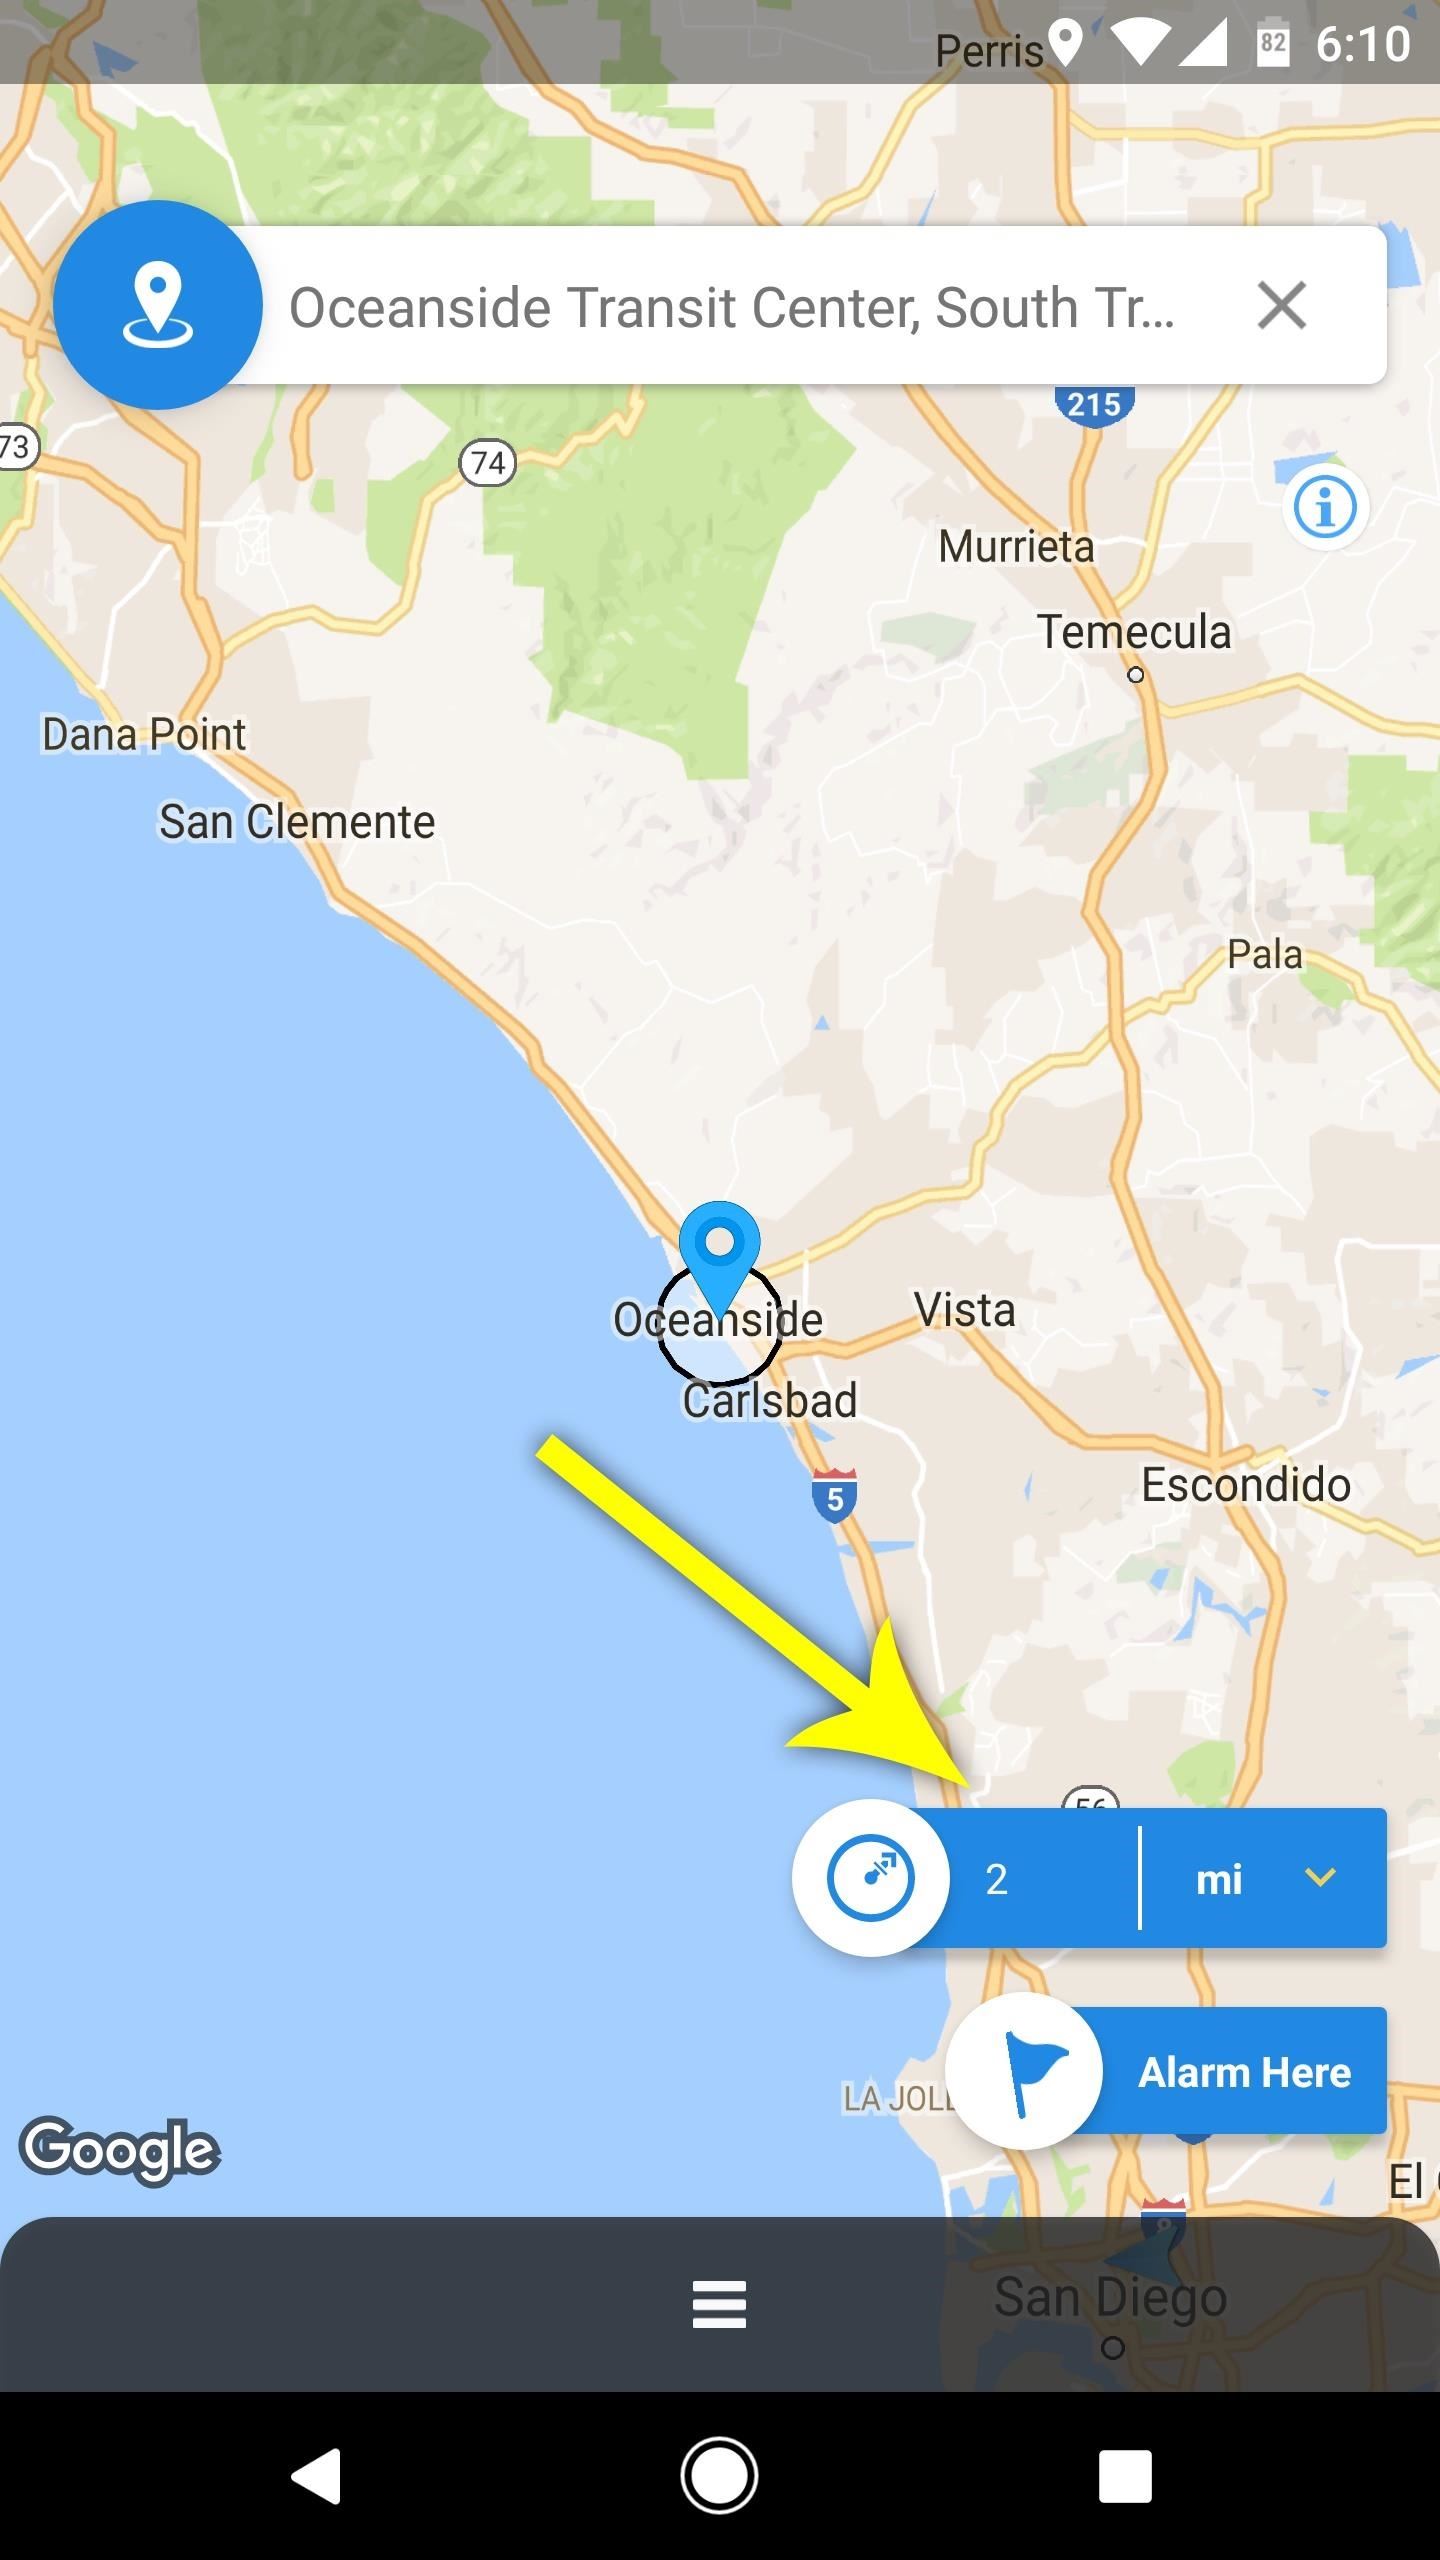 Set Up Location Alarms on Android That Wake You When You Reach Your Destination